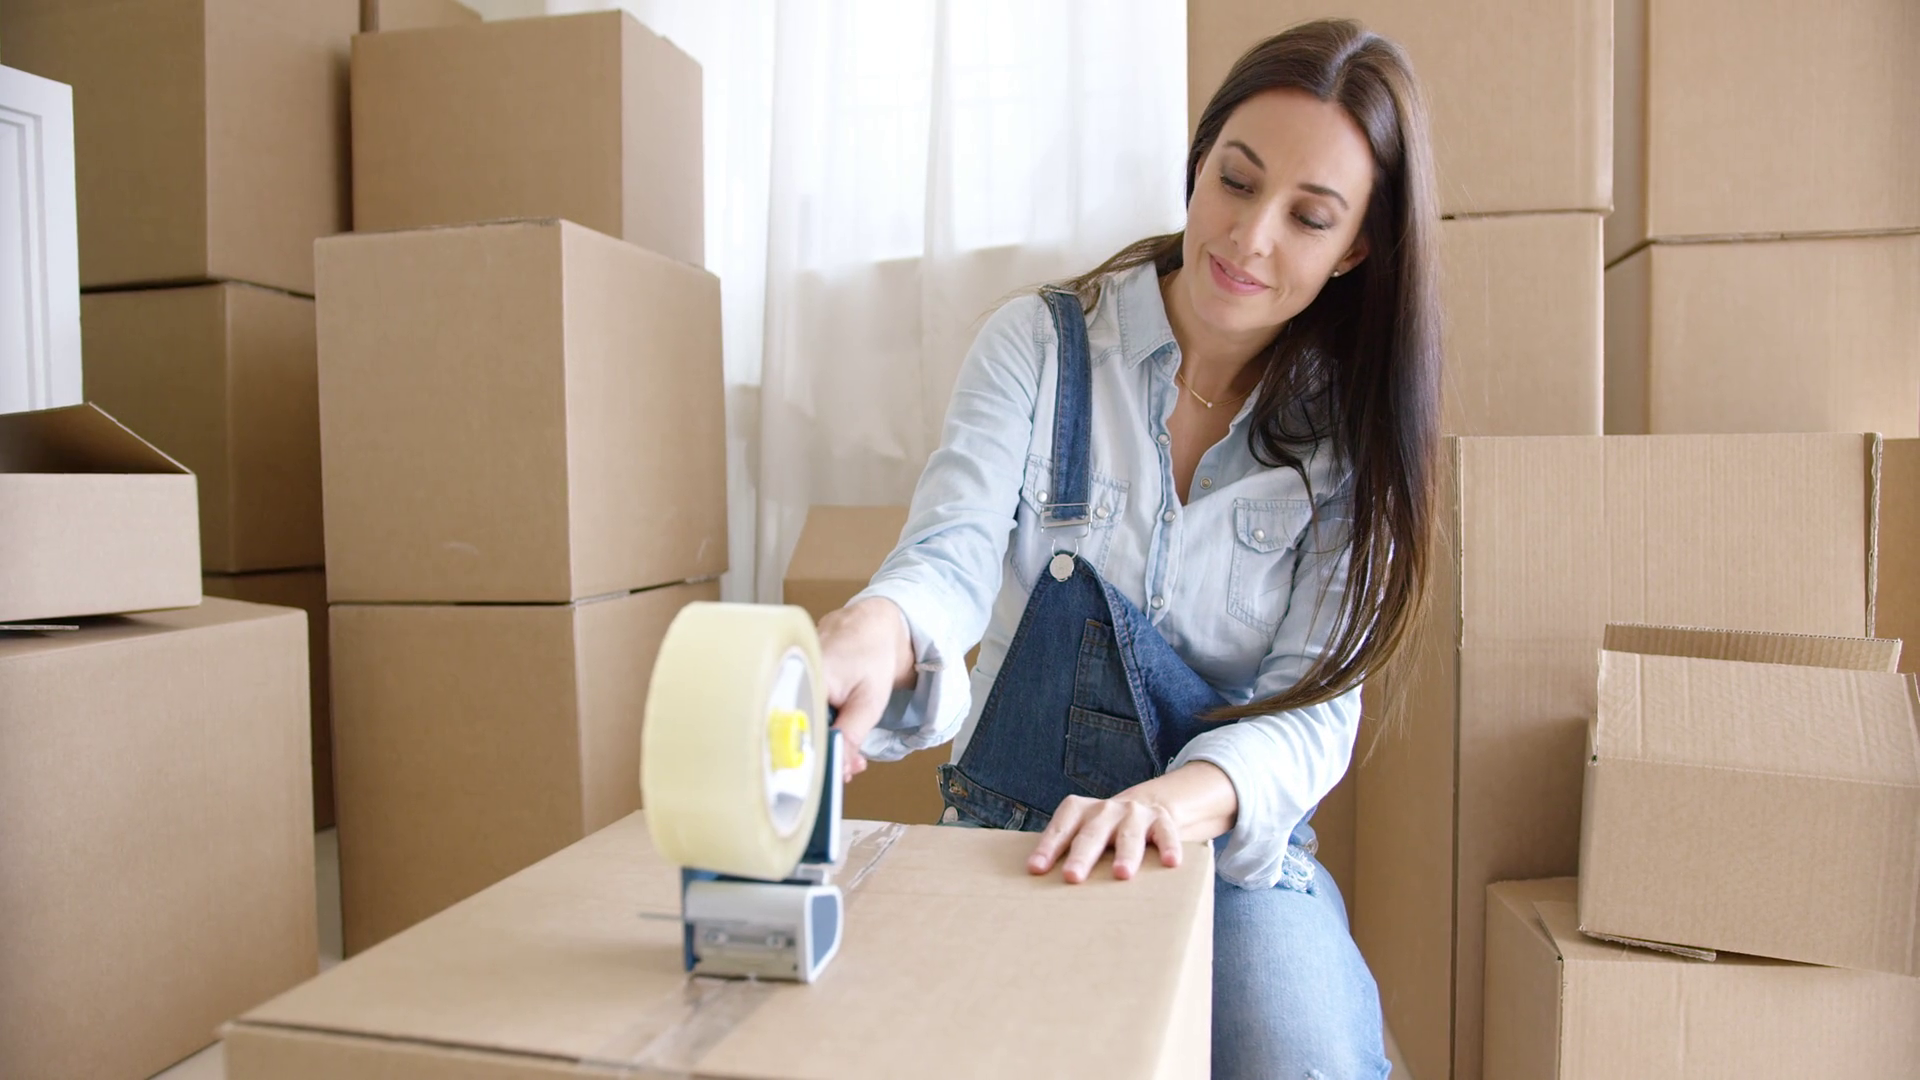 young-woman-moving-home-packing-brown-cardboard-boxes-with-a-roll-of-tape-in-a-close-up-view-with-stacked-boxes-behind-her_rszantomue_thumbnail-full01